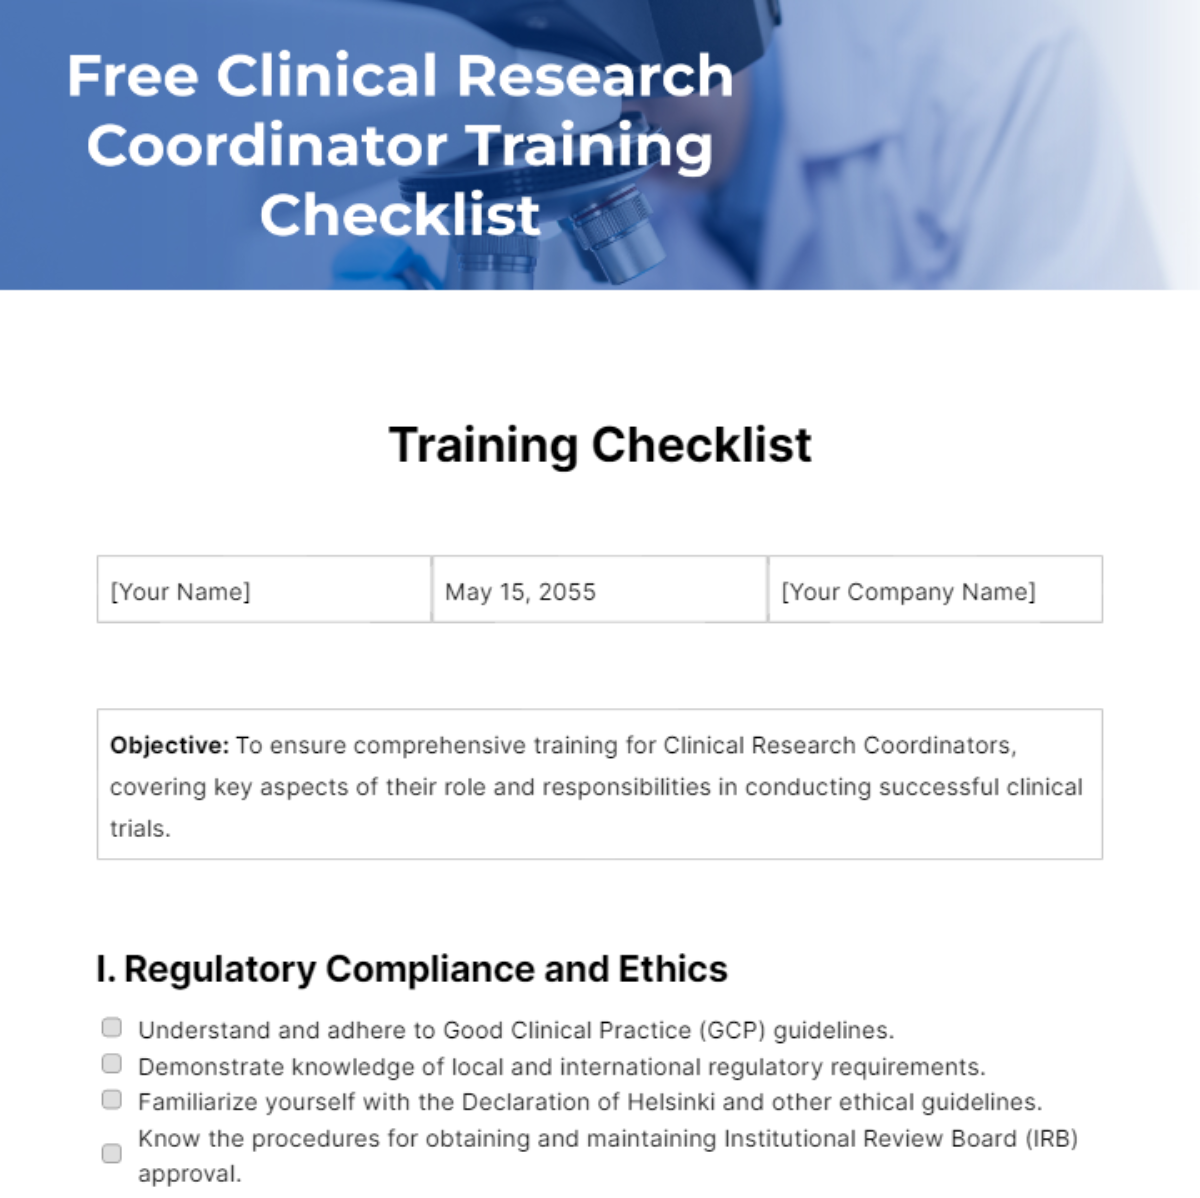 Free Clinical Research Coordinator Training Checklist Template